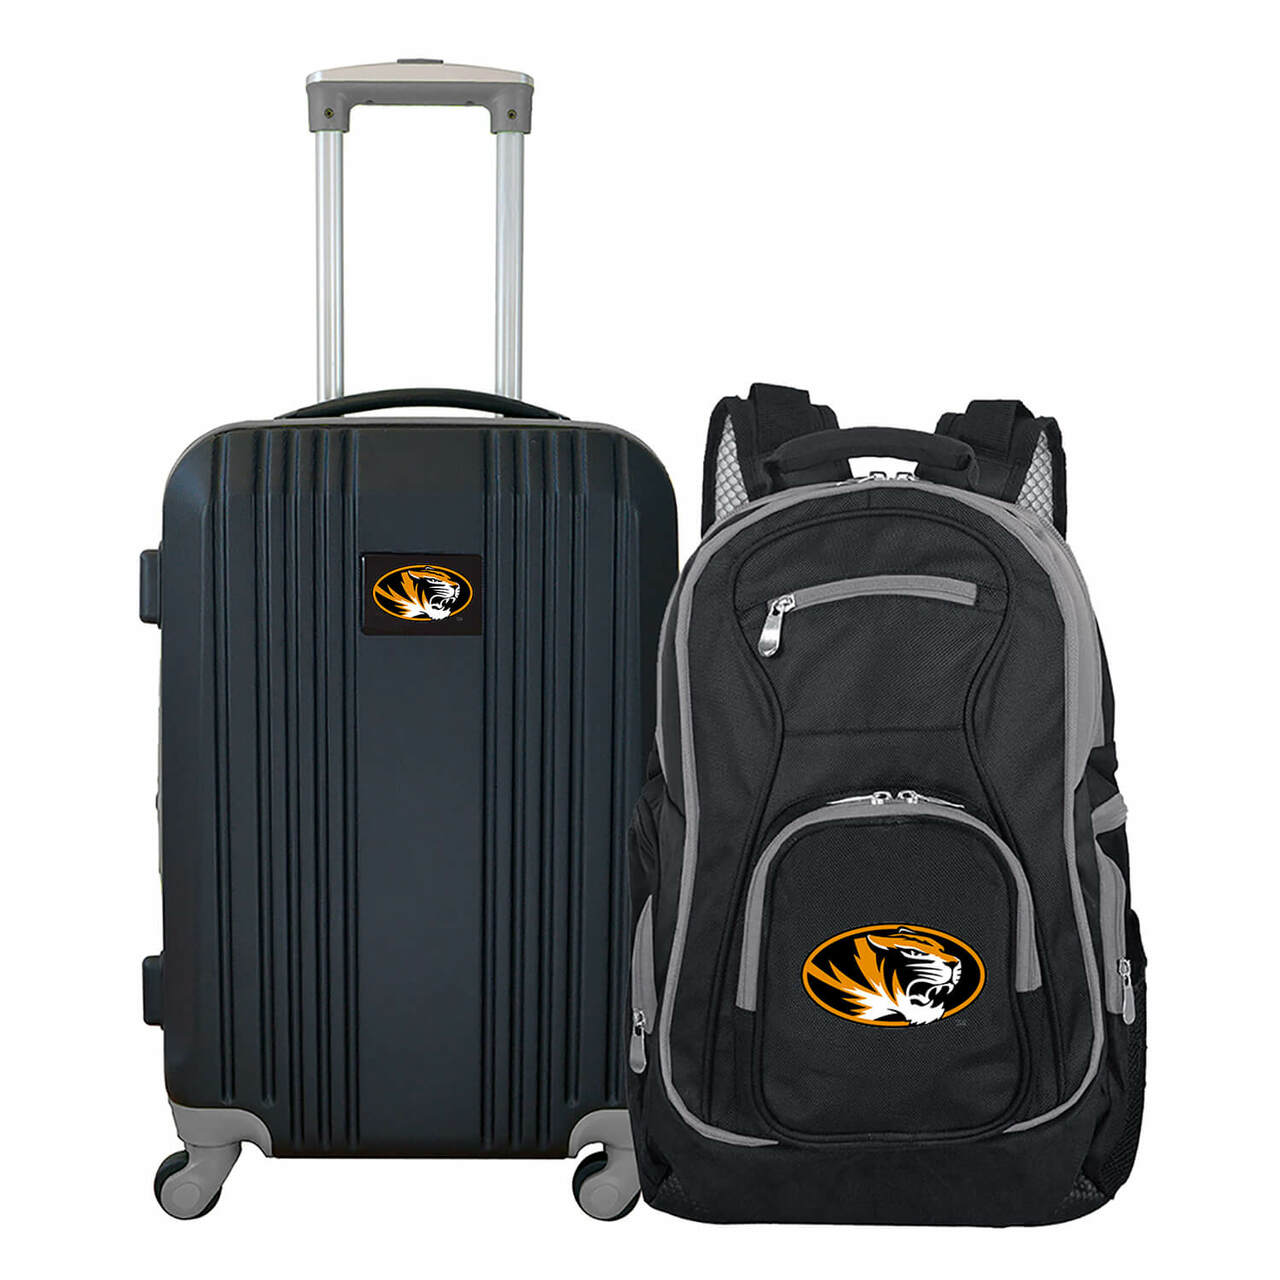 Missouri Tigers 2 Piece Premium Colored Trim Backpack and Luggage Set